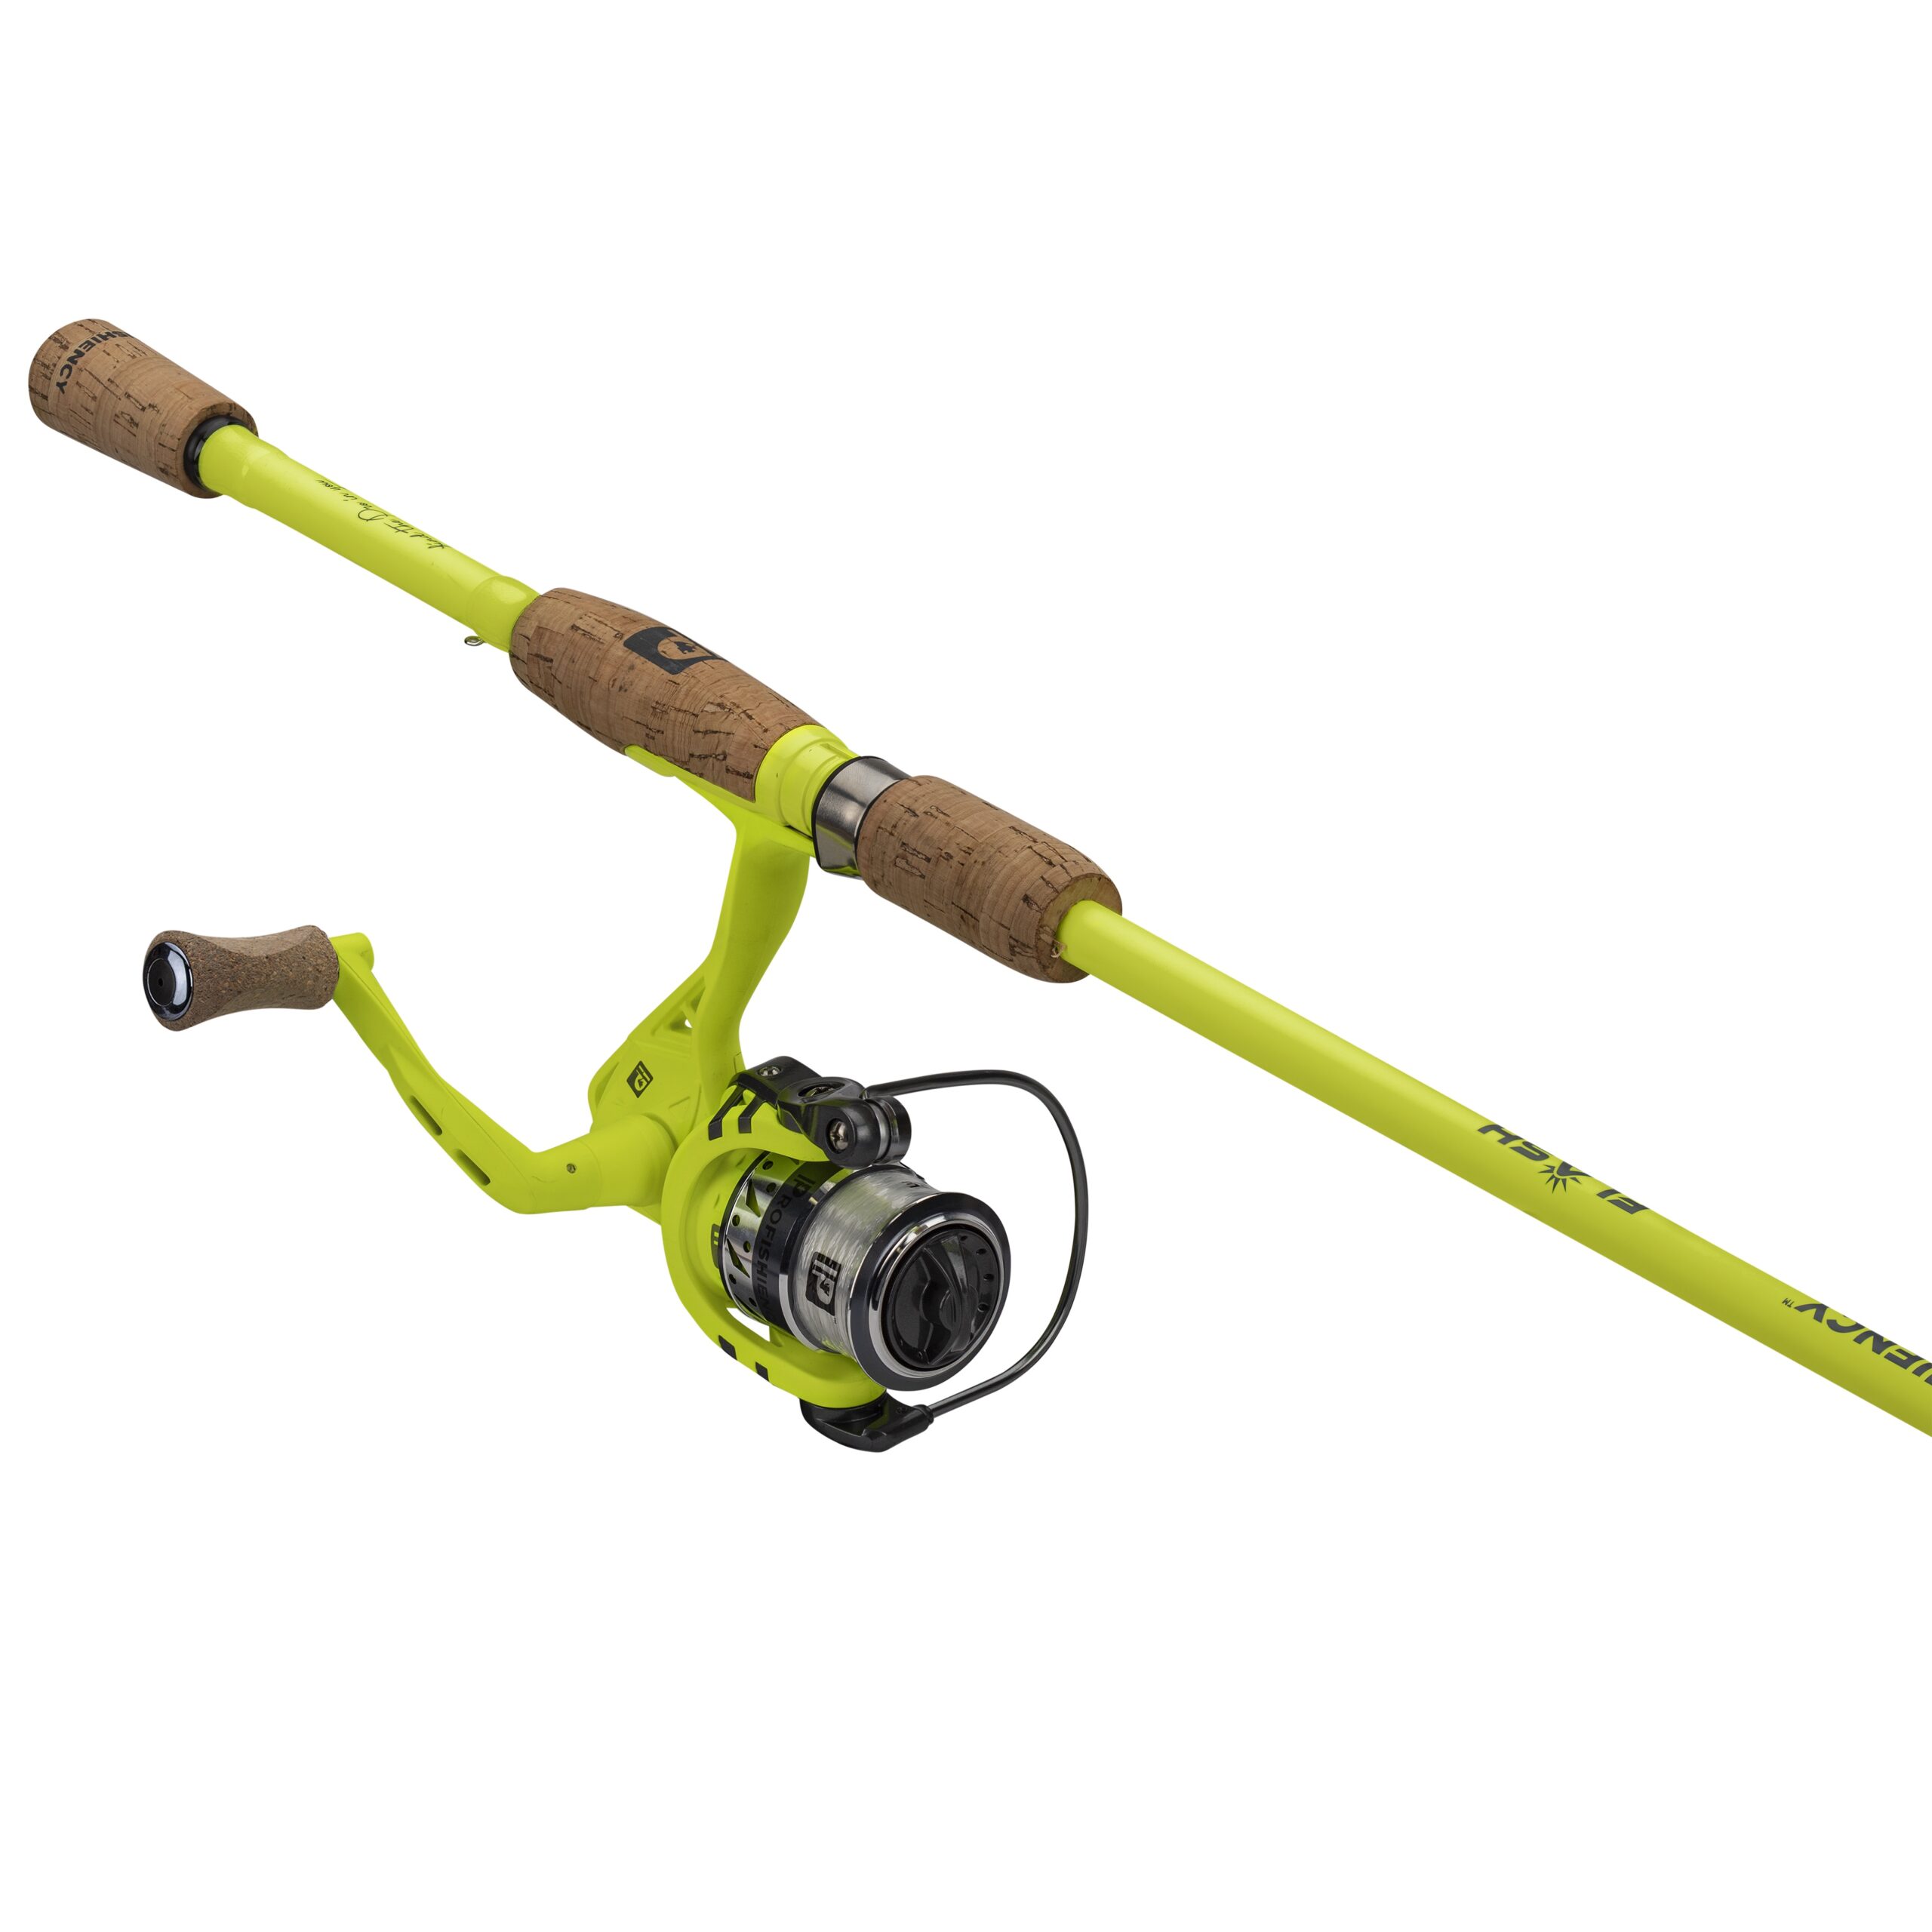 ProFISHiency 2.0 Spinning Combo with Lures, 5' - Krazy ☆ The Sporting  Shoppe ☆ Richmond, Rhode Island